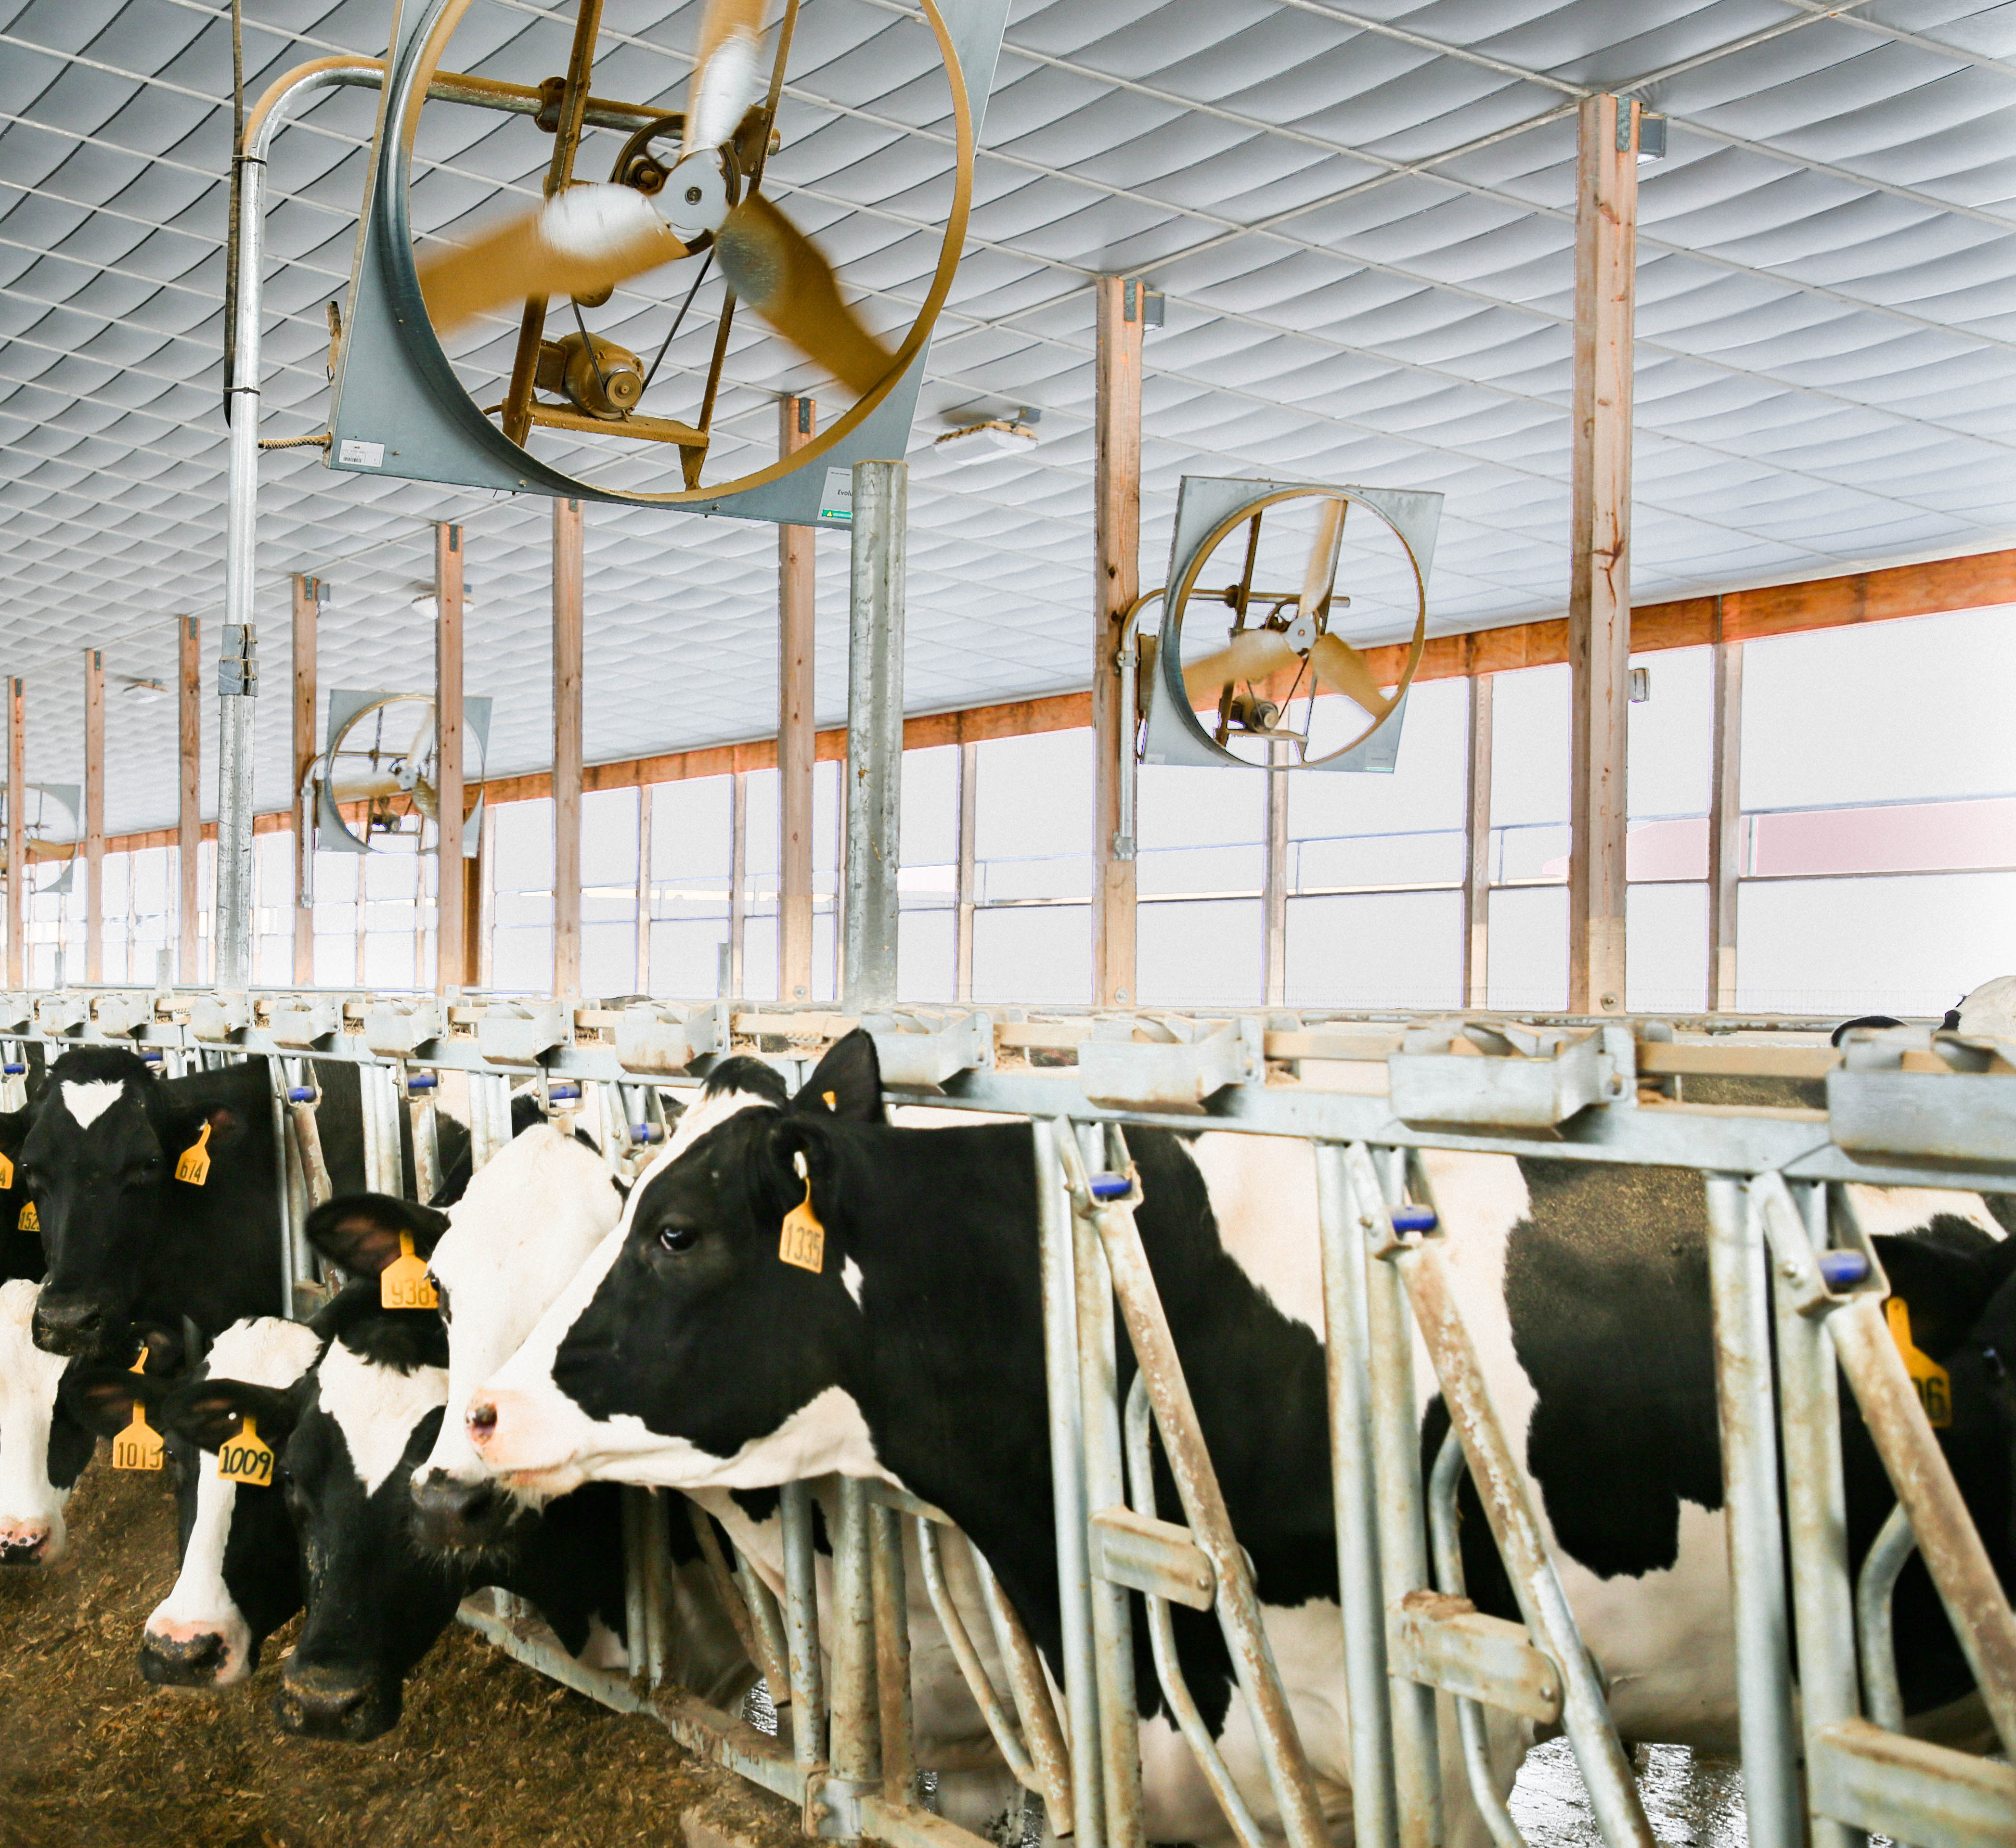 Dairy Barn Ventilation System - The MAXIMUS controller calculates the value of the temperature/humidity index (THI)